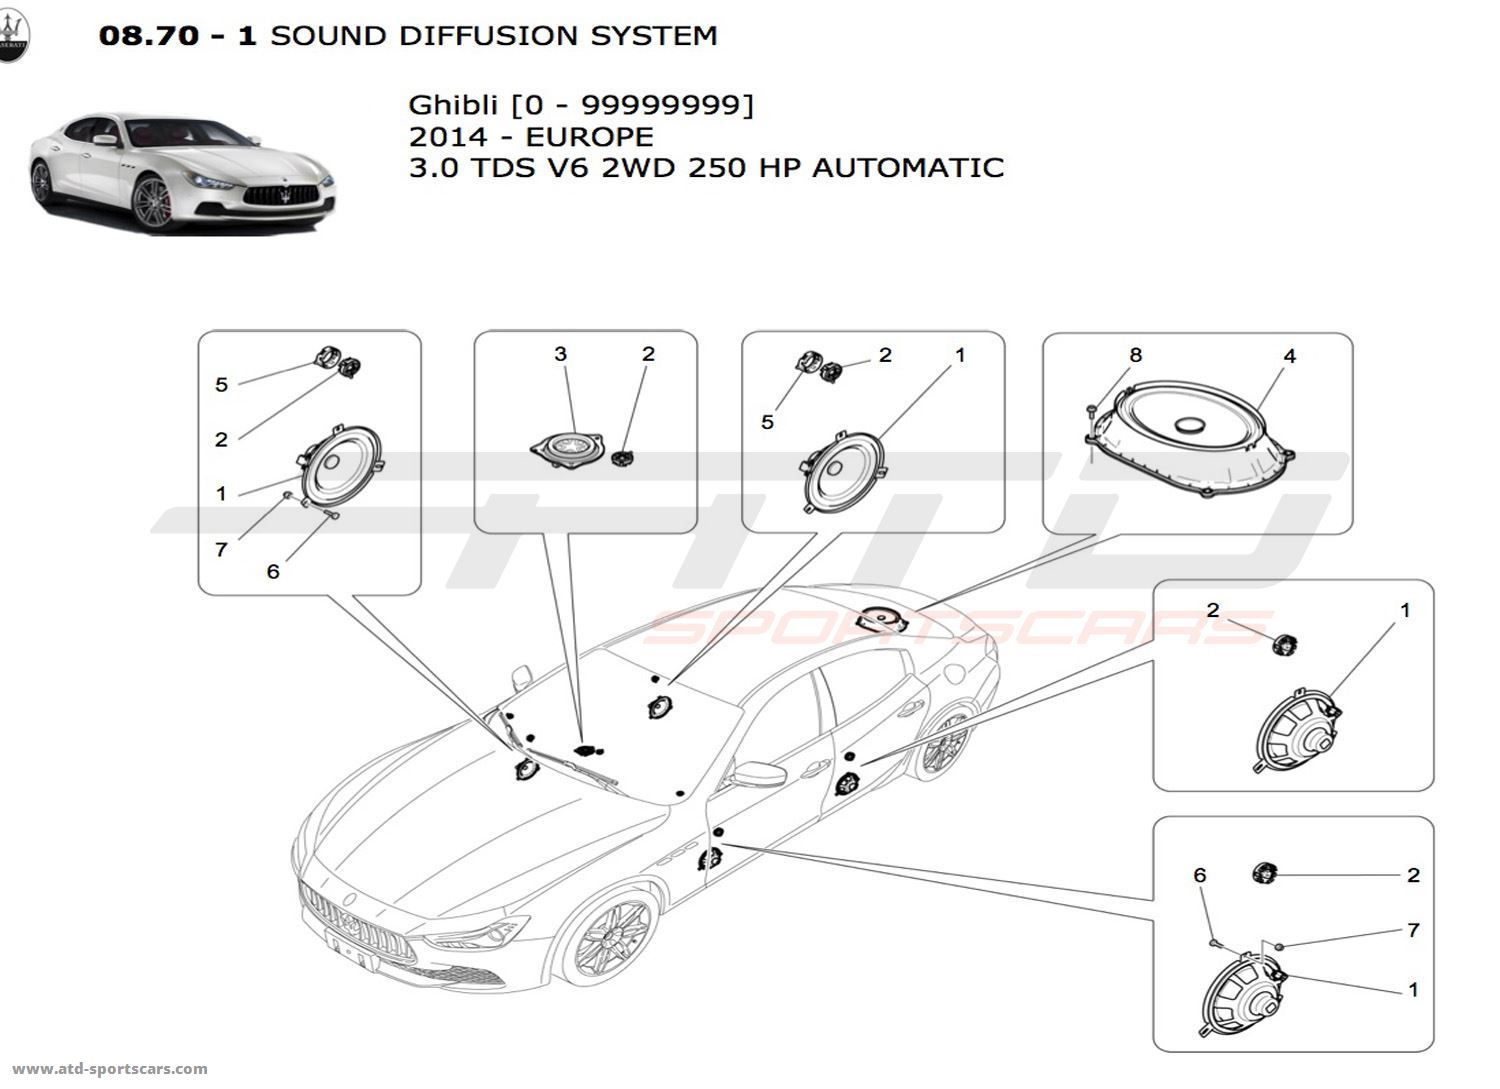 SOUND DIFFUSION SYSTEM